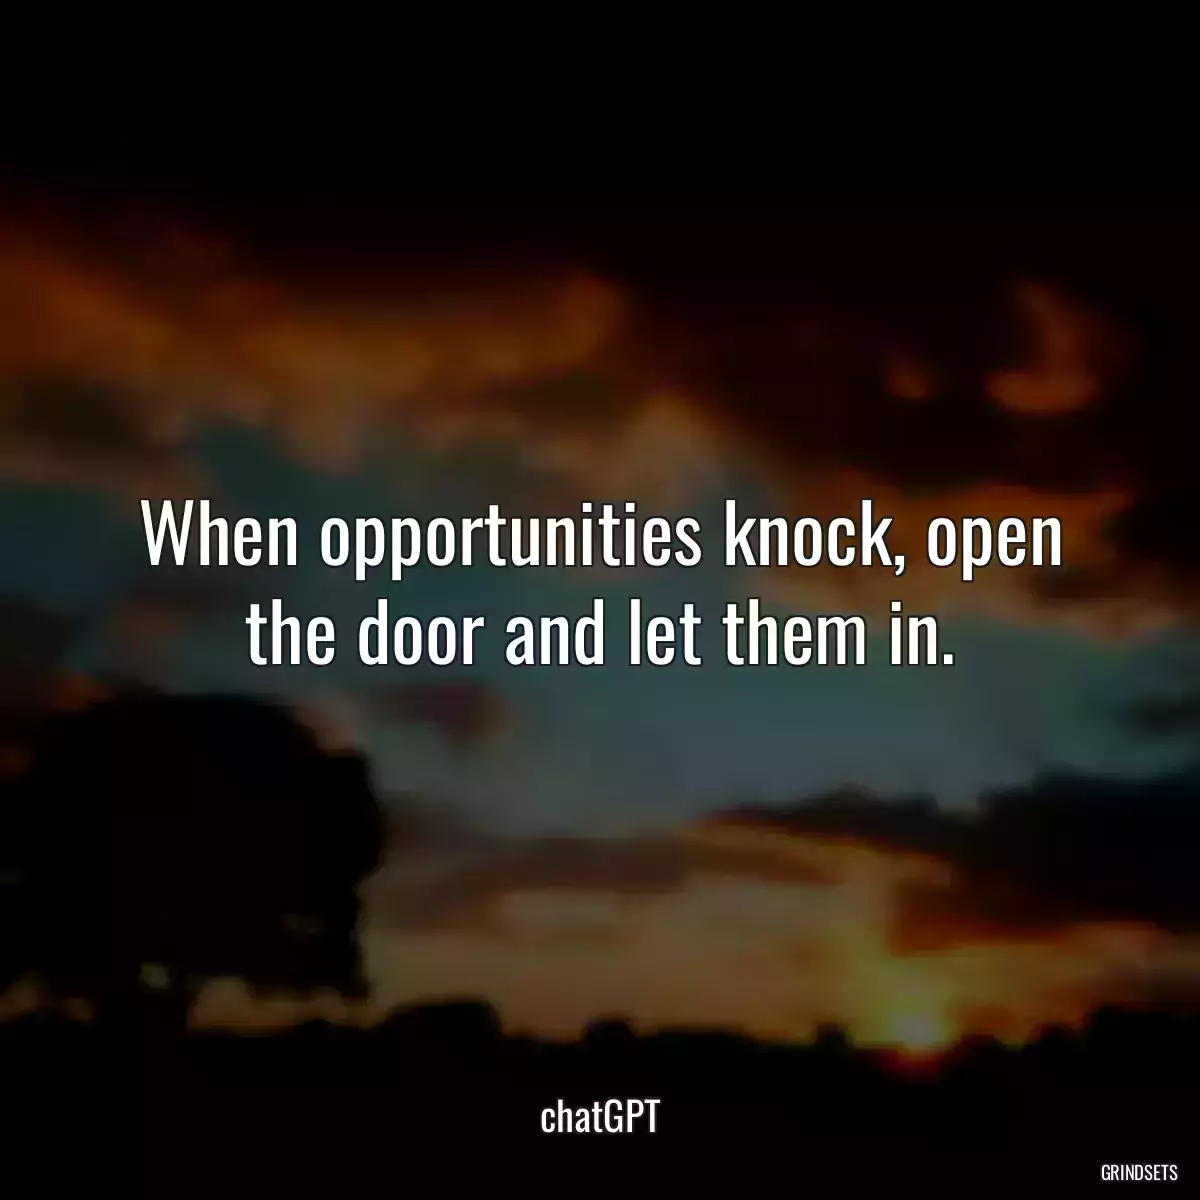 When opportunities knock, open the door and let them in.